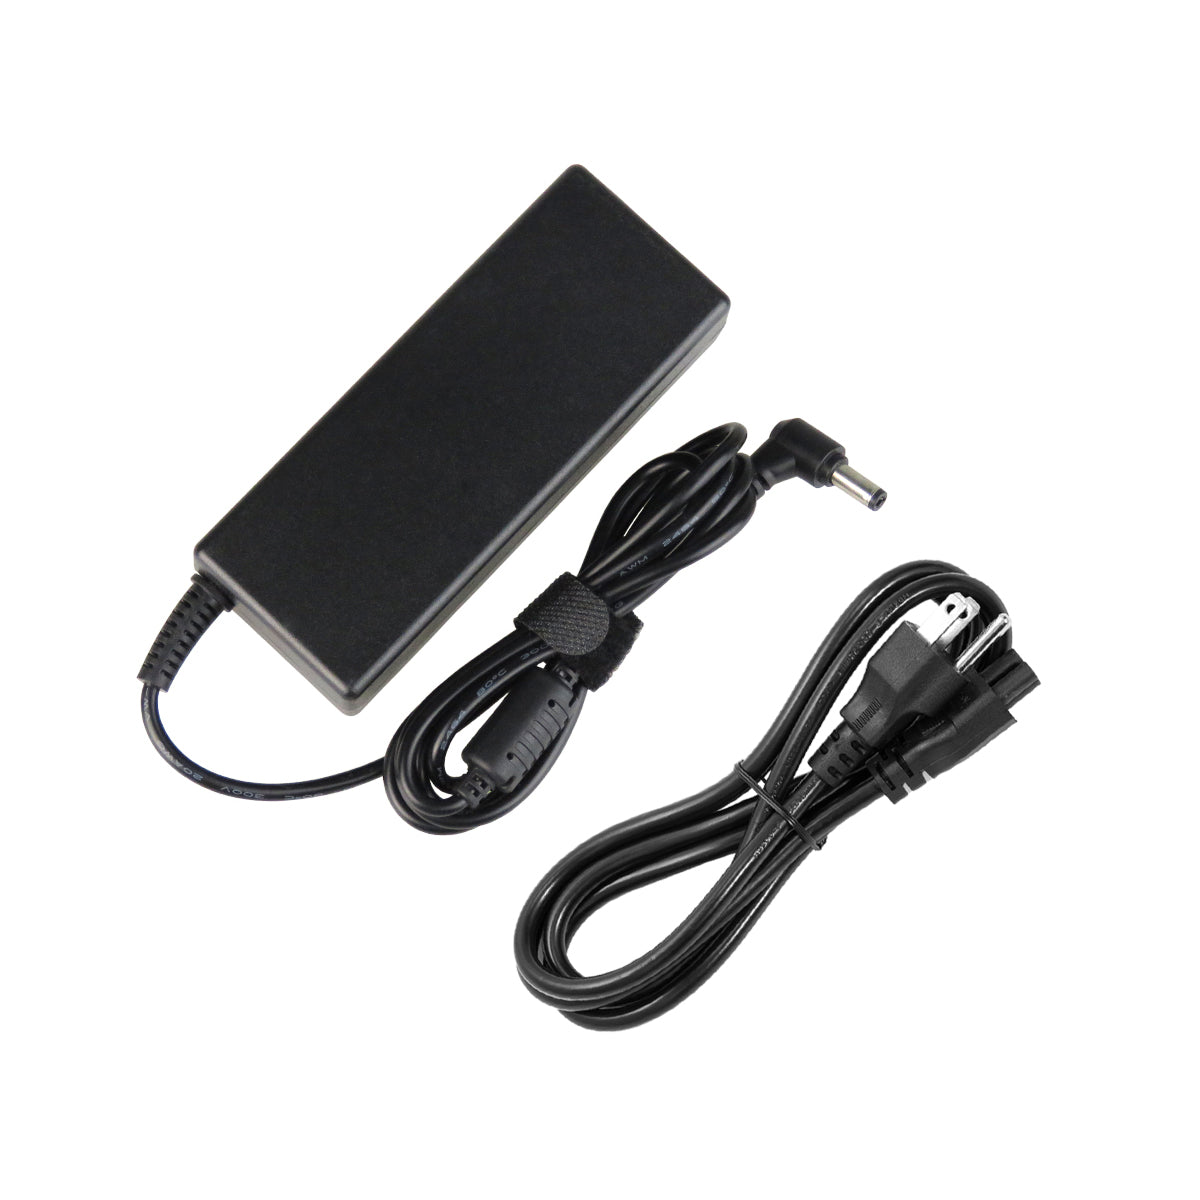 AC Adapter Charger for ASUS K45VS Notebook.